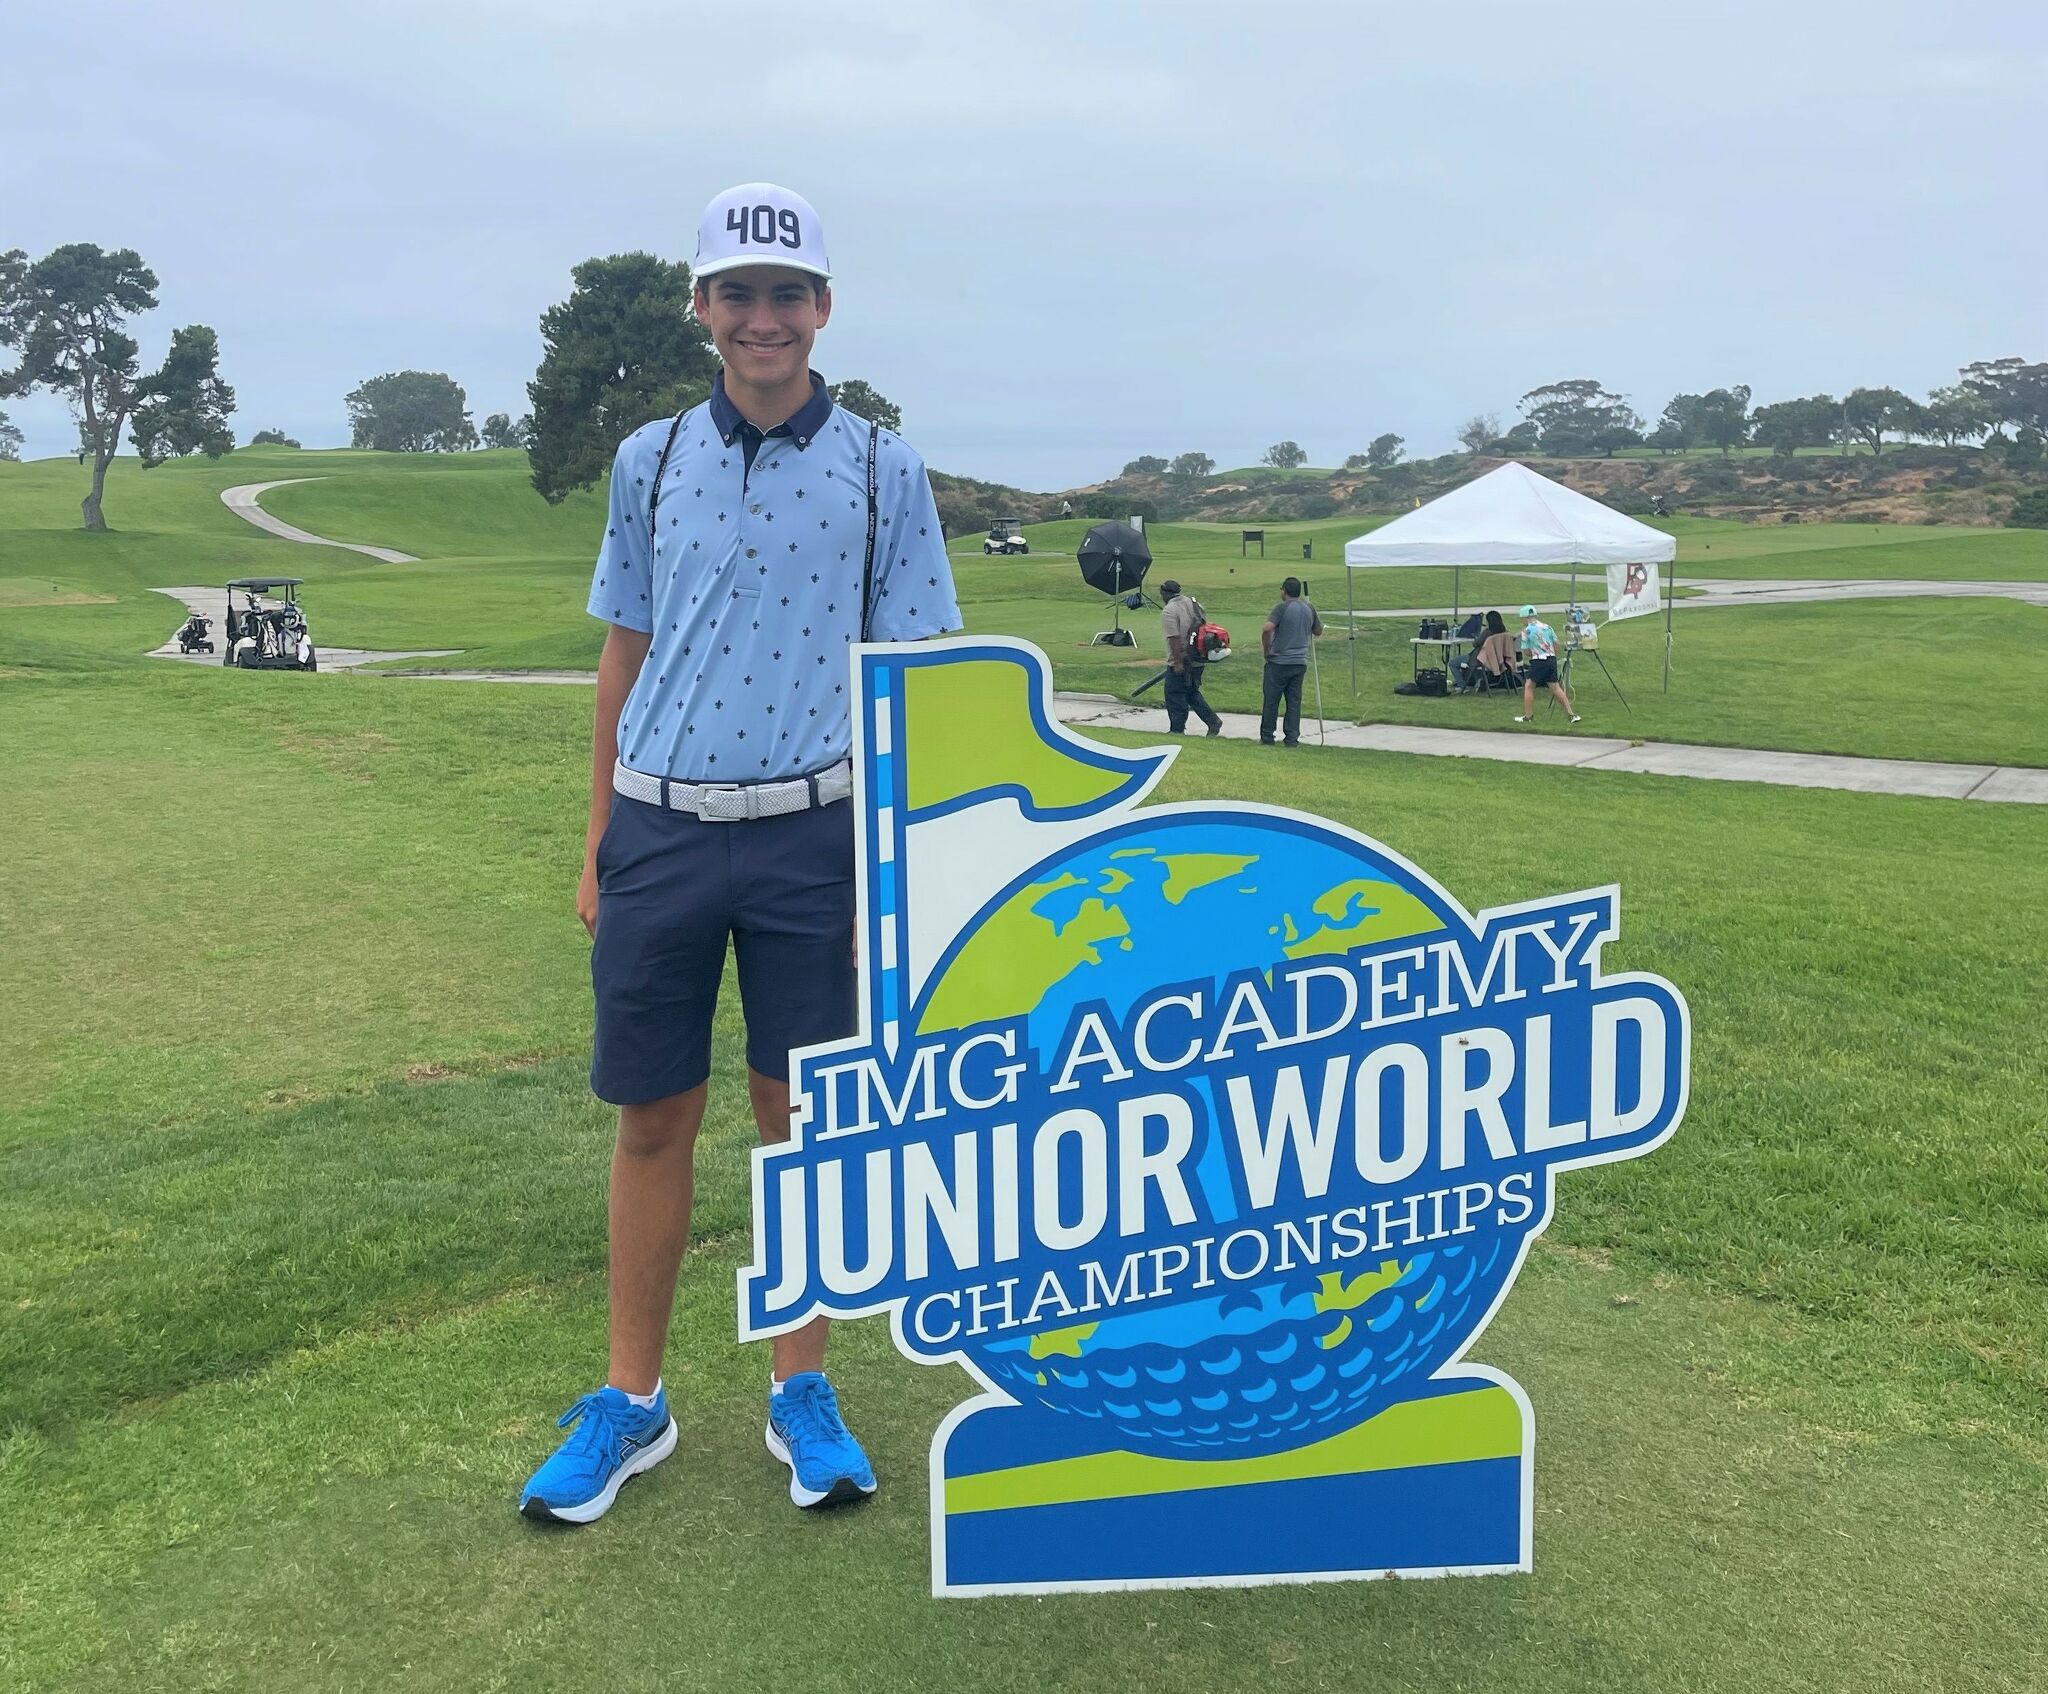 youth-golfer-competes-at-img-academy-junior-world-championships